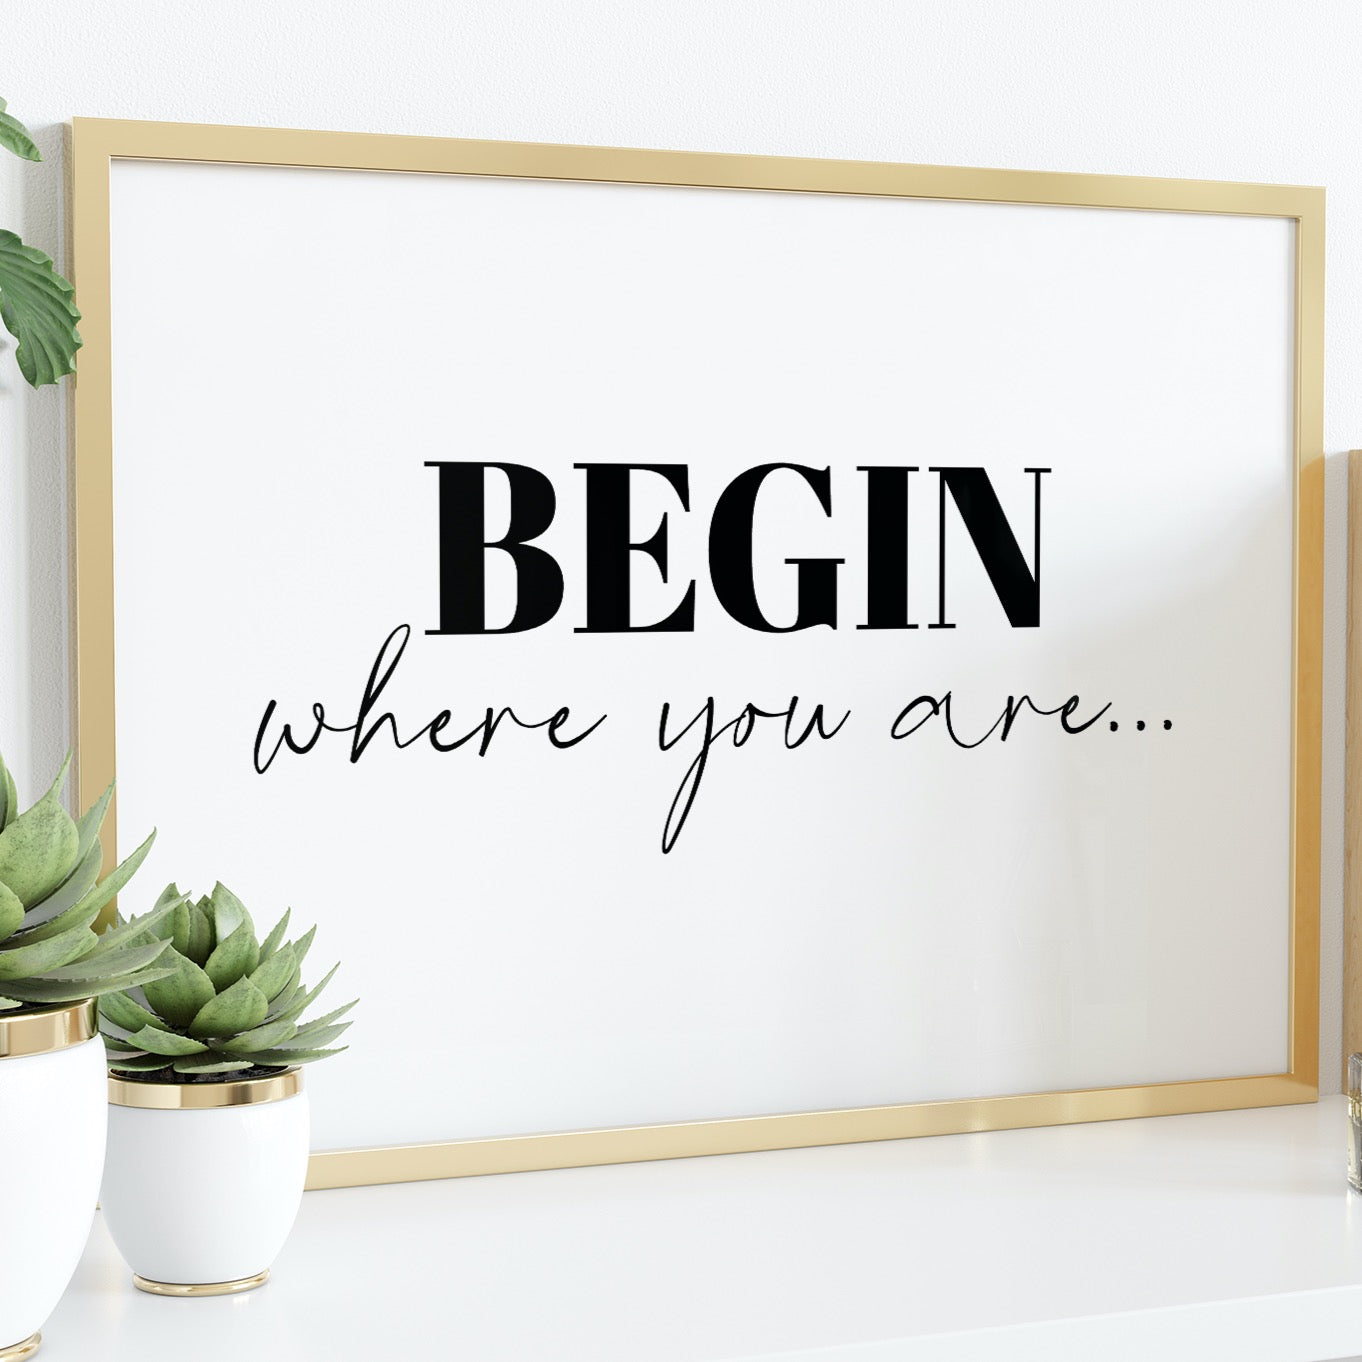 BEGIN WHERE YOU ARE... Print